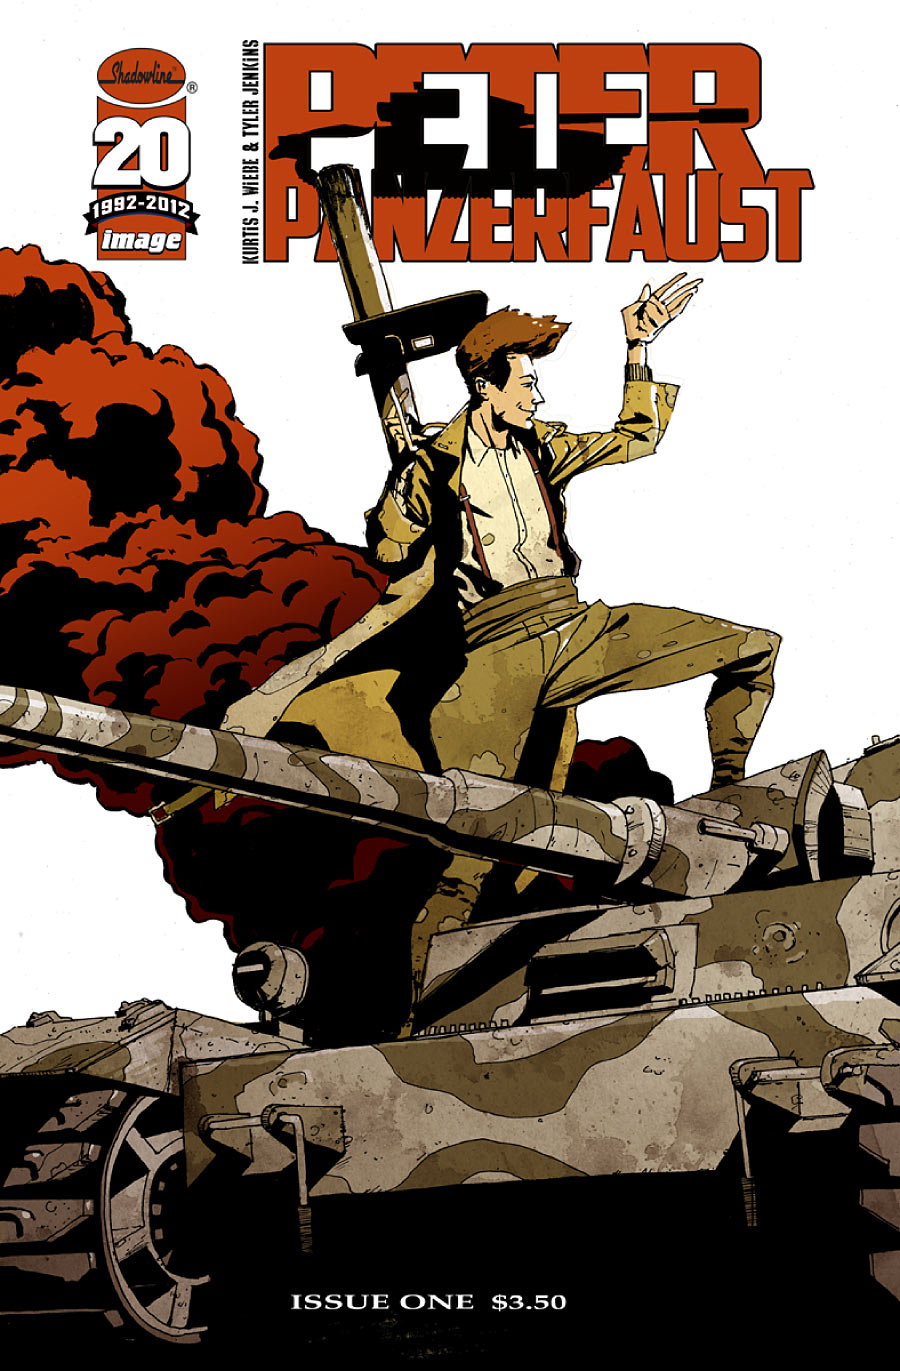  SDCC 2012: Kurtis Wiebe Signs Deal for possible Peter Panzerfaust TV Series